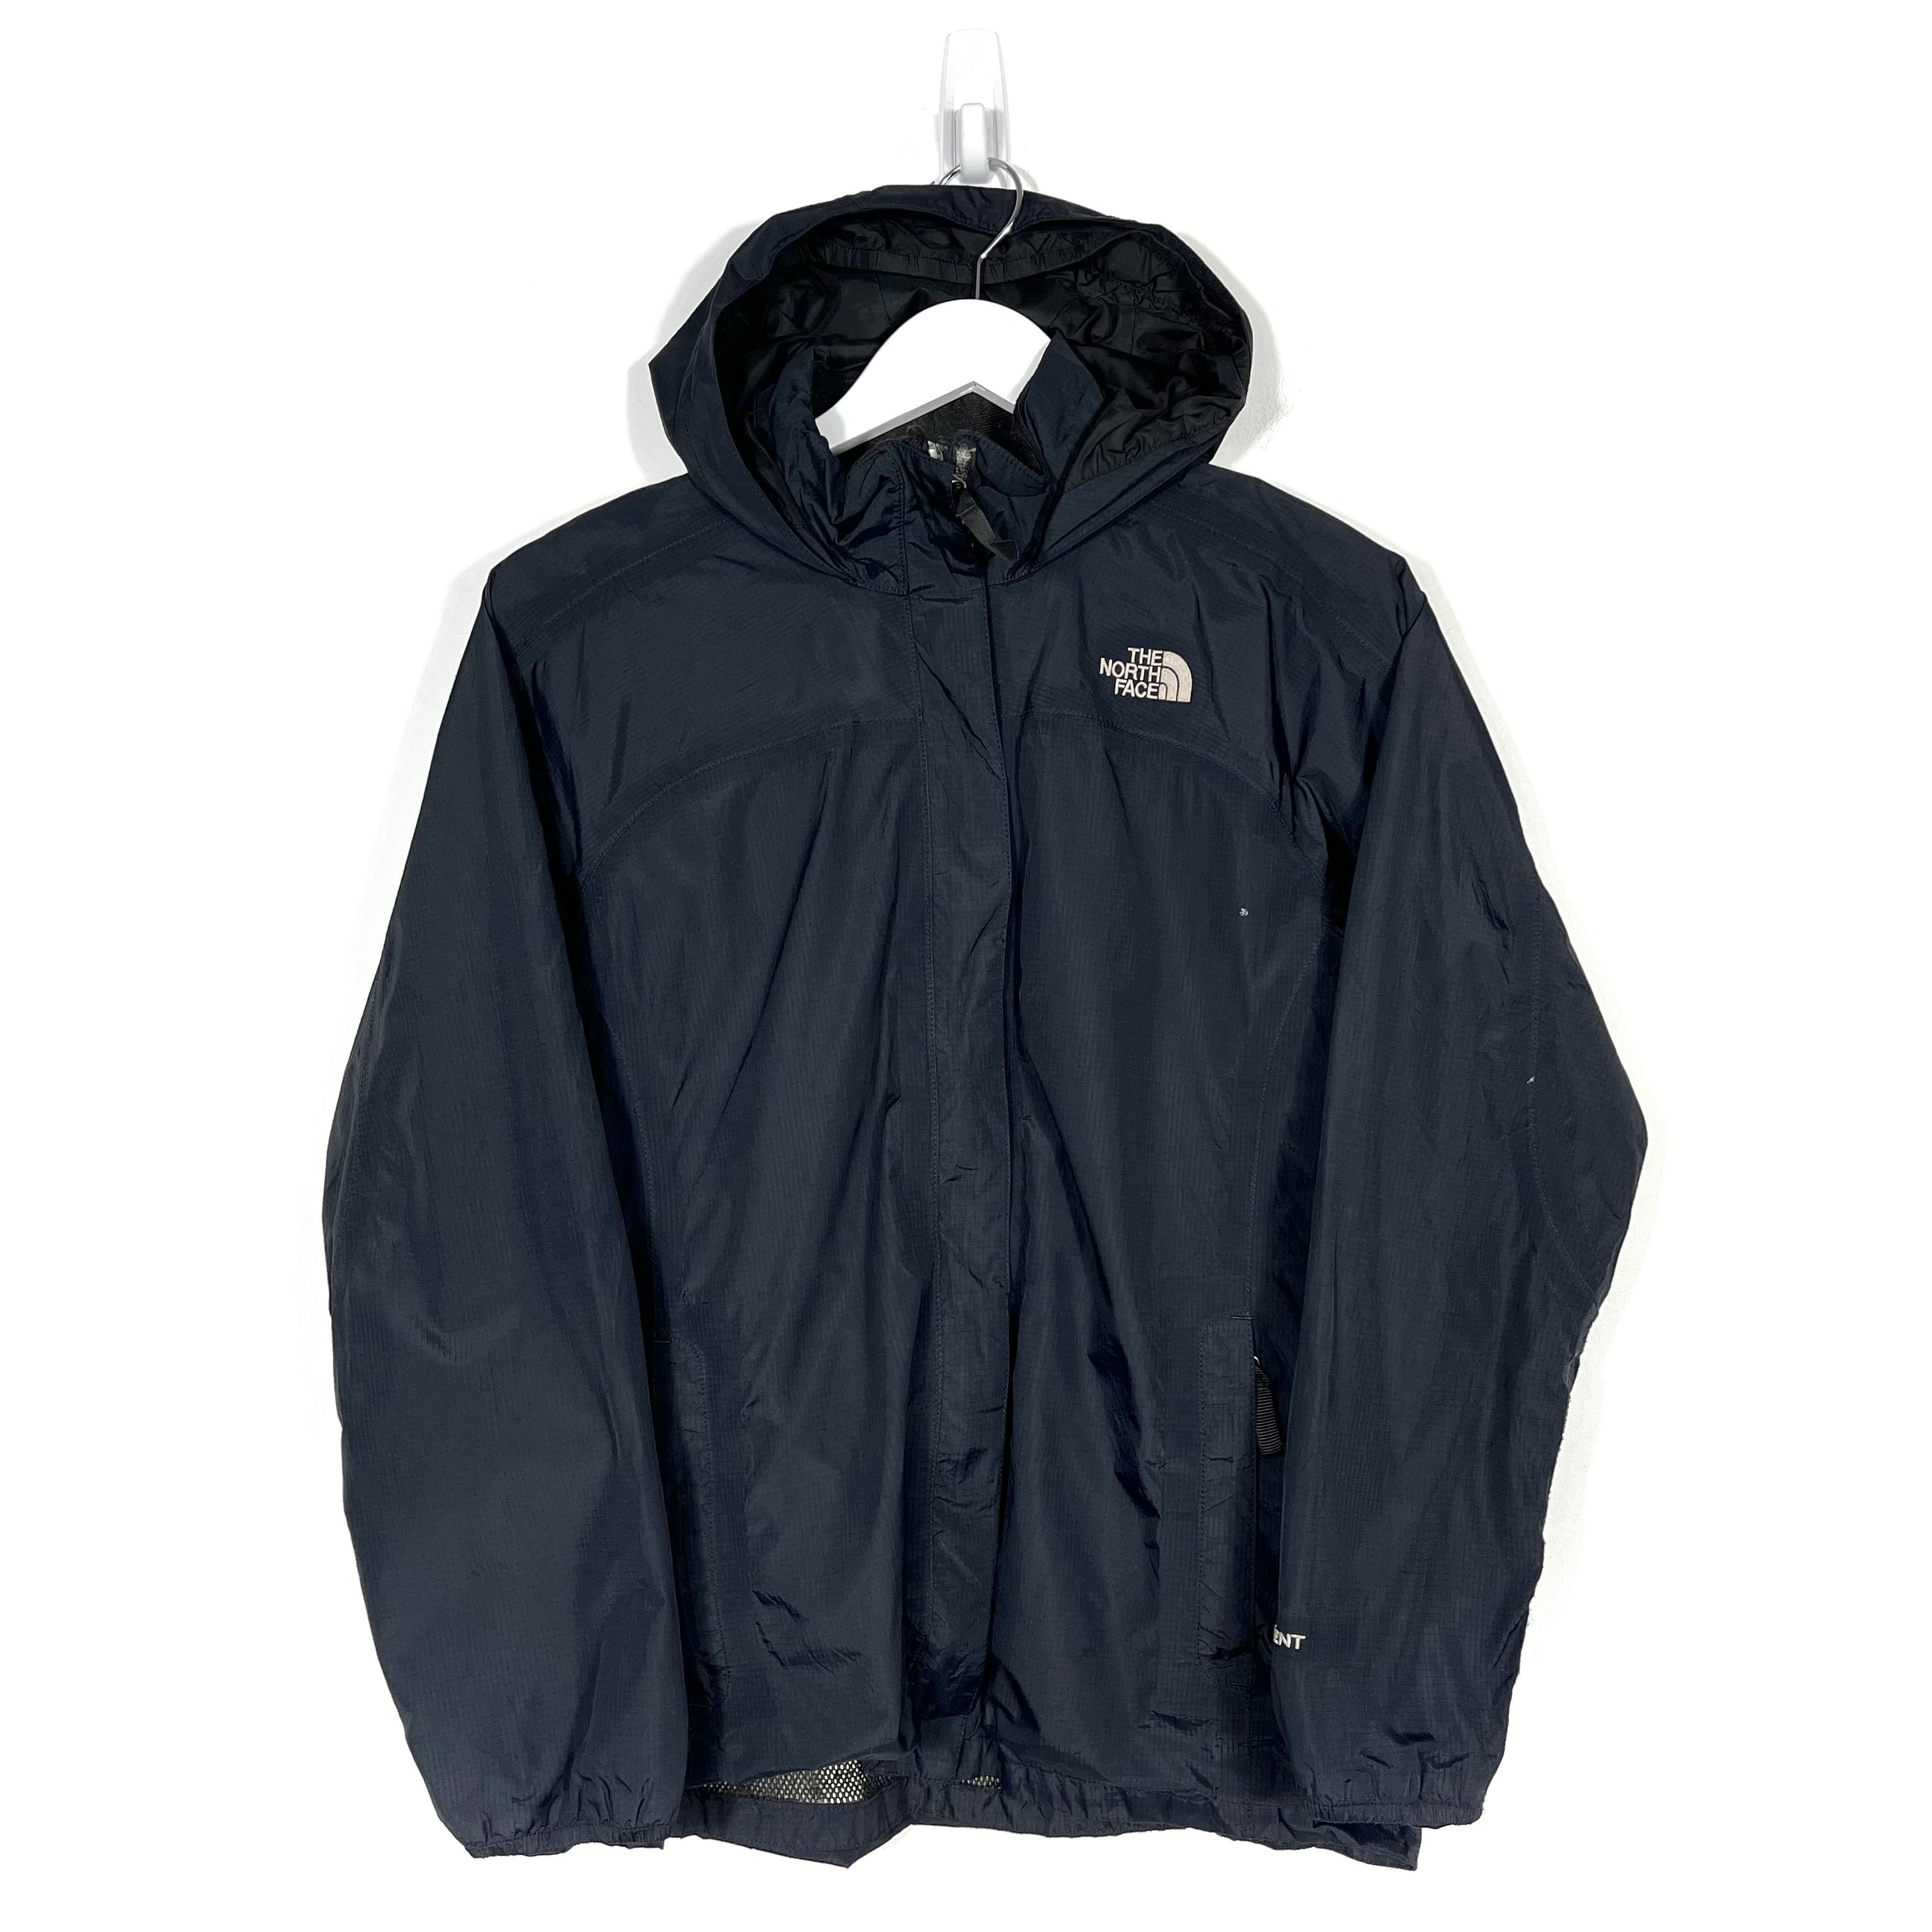 The North Face HyVent Lightweight Jacket - Women's Small